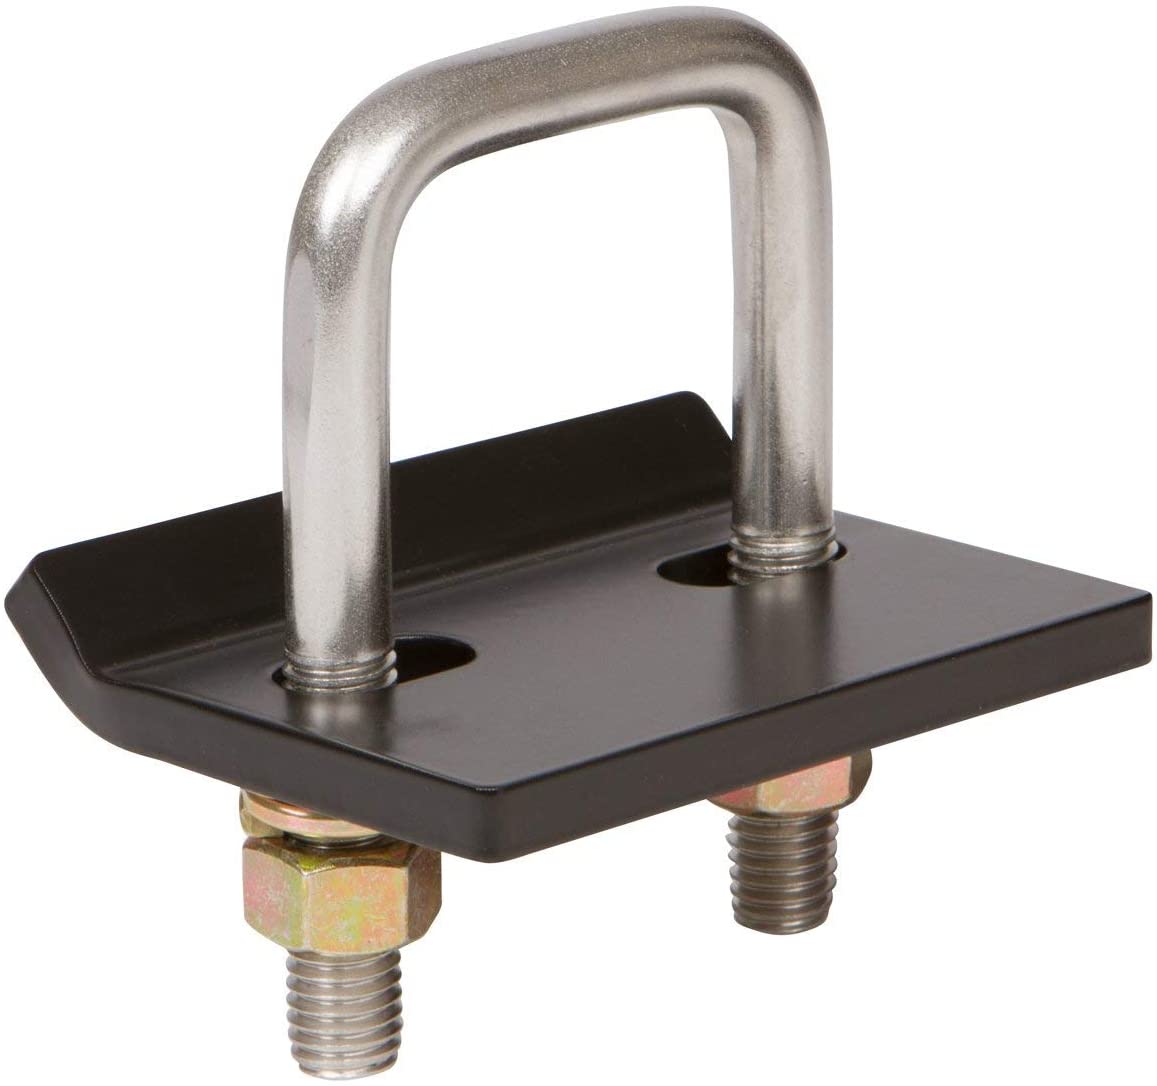 StowAway Hitch Tightener, Anti-Rattle Stabilizer for 2 Inch and 1.25 Inch Hitches. Made in USA with a.